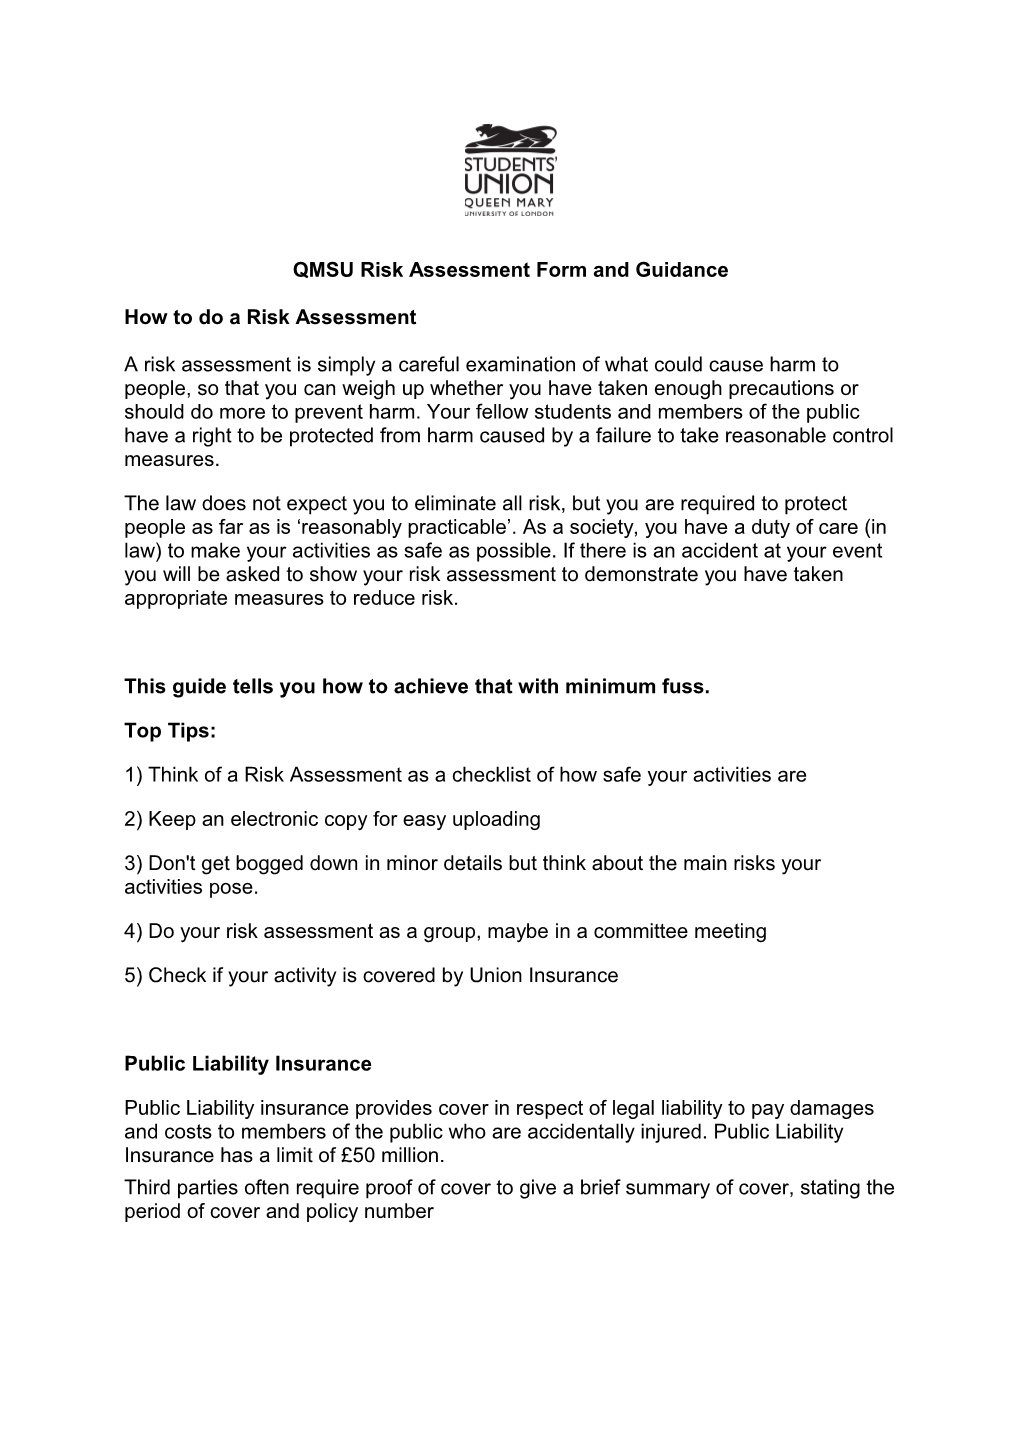 QMSU Risk Assessment Form and Guidance